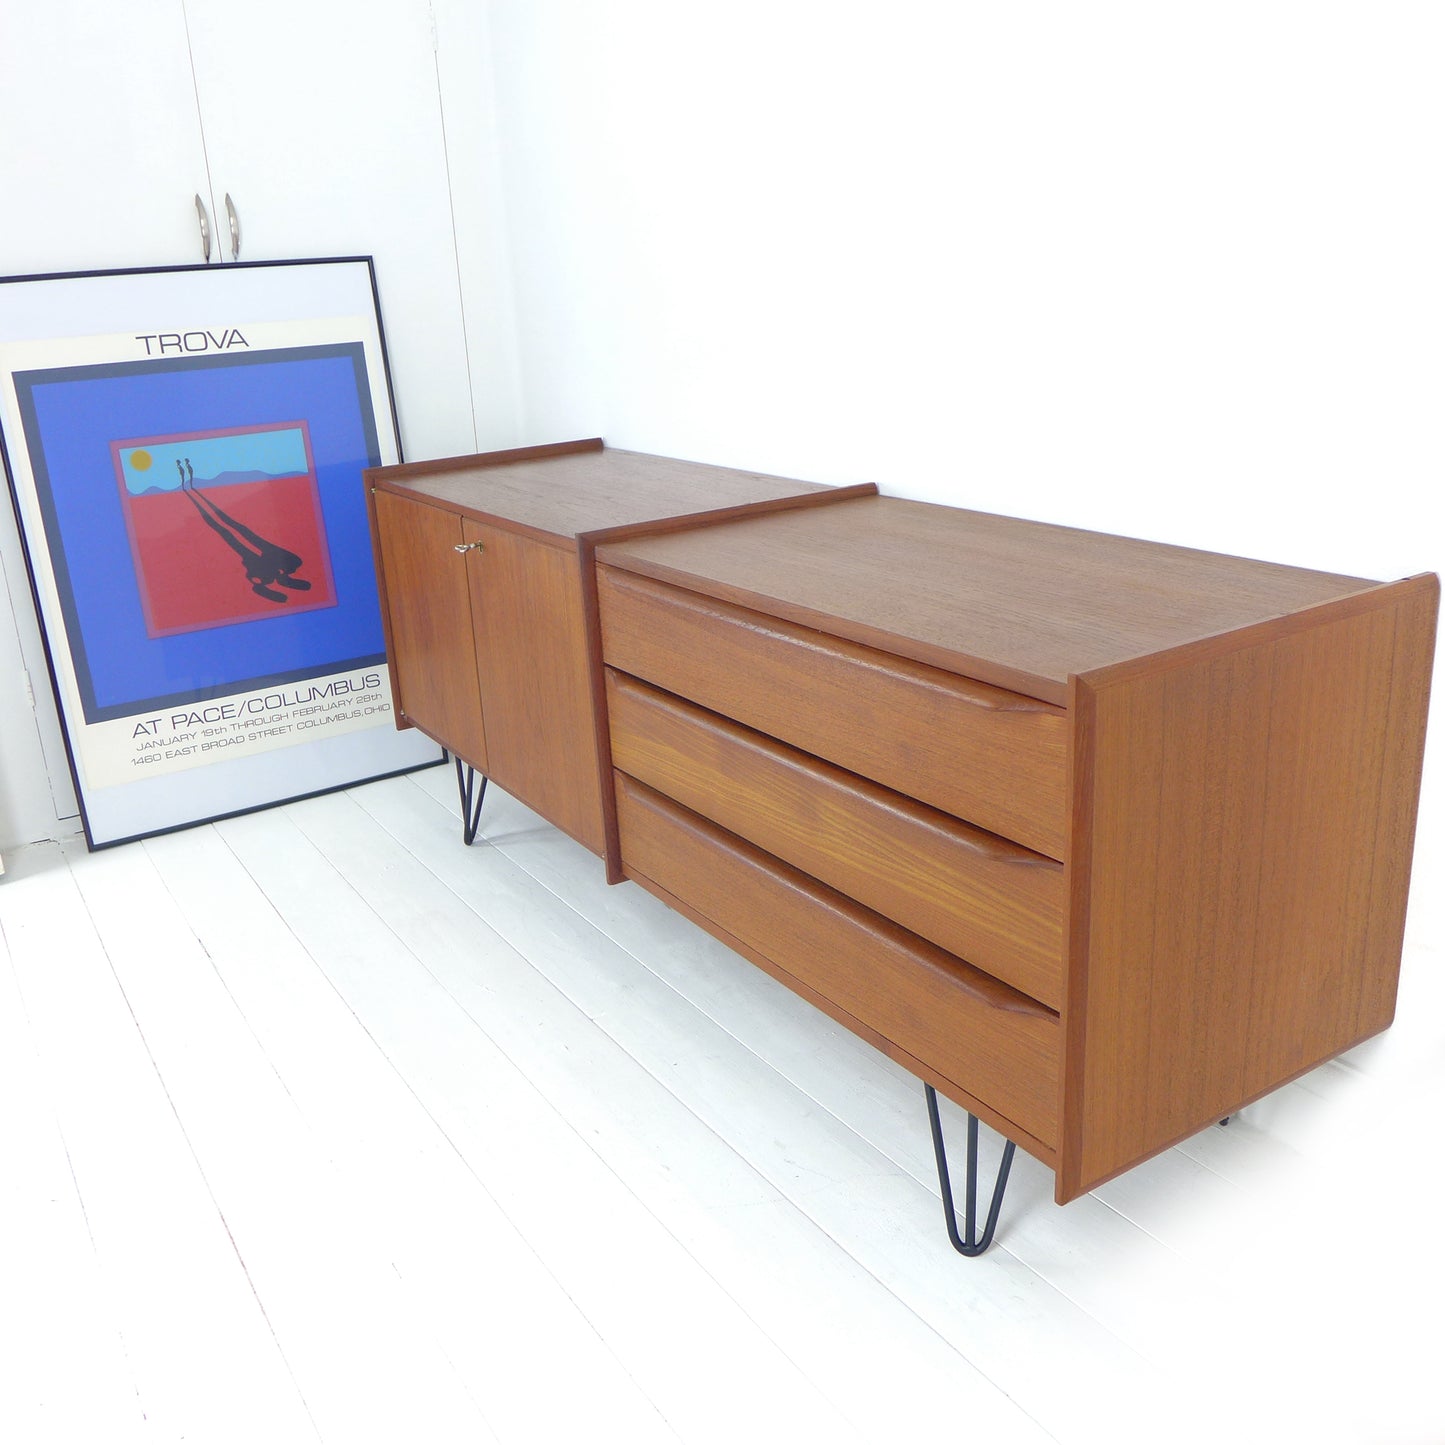 Mid Century Teak Sideboard on Hairpin Legs - Record / Drinks Cabinet / TV Stand